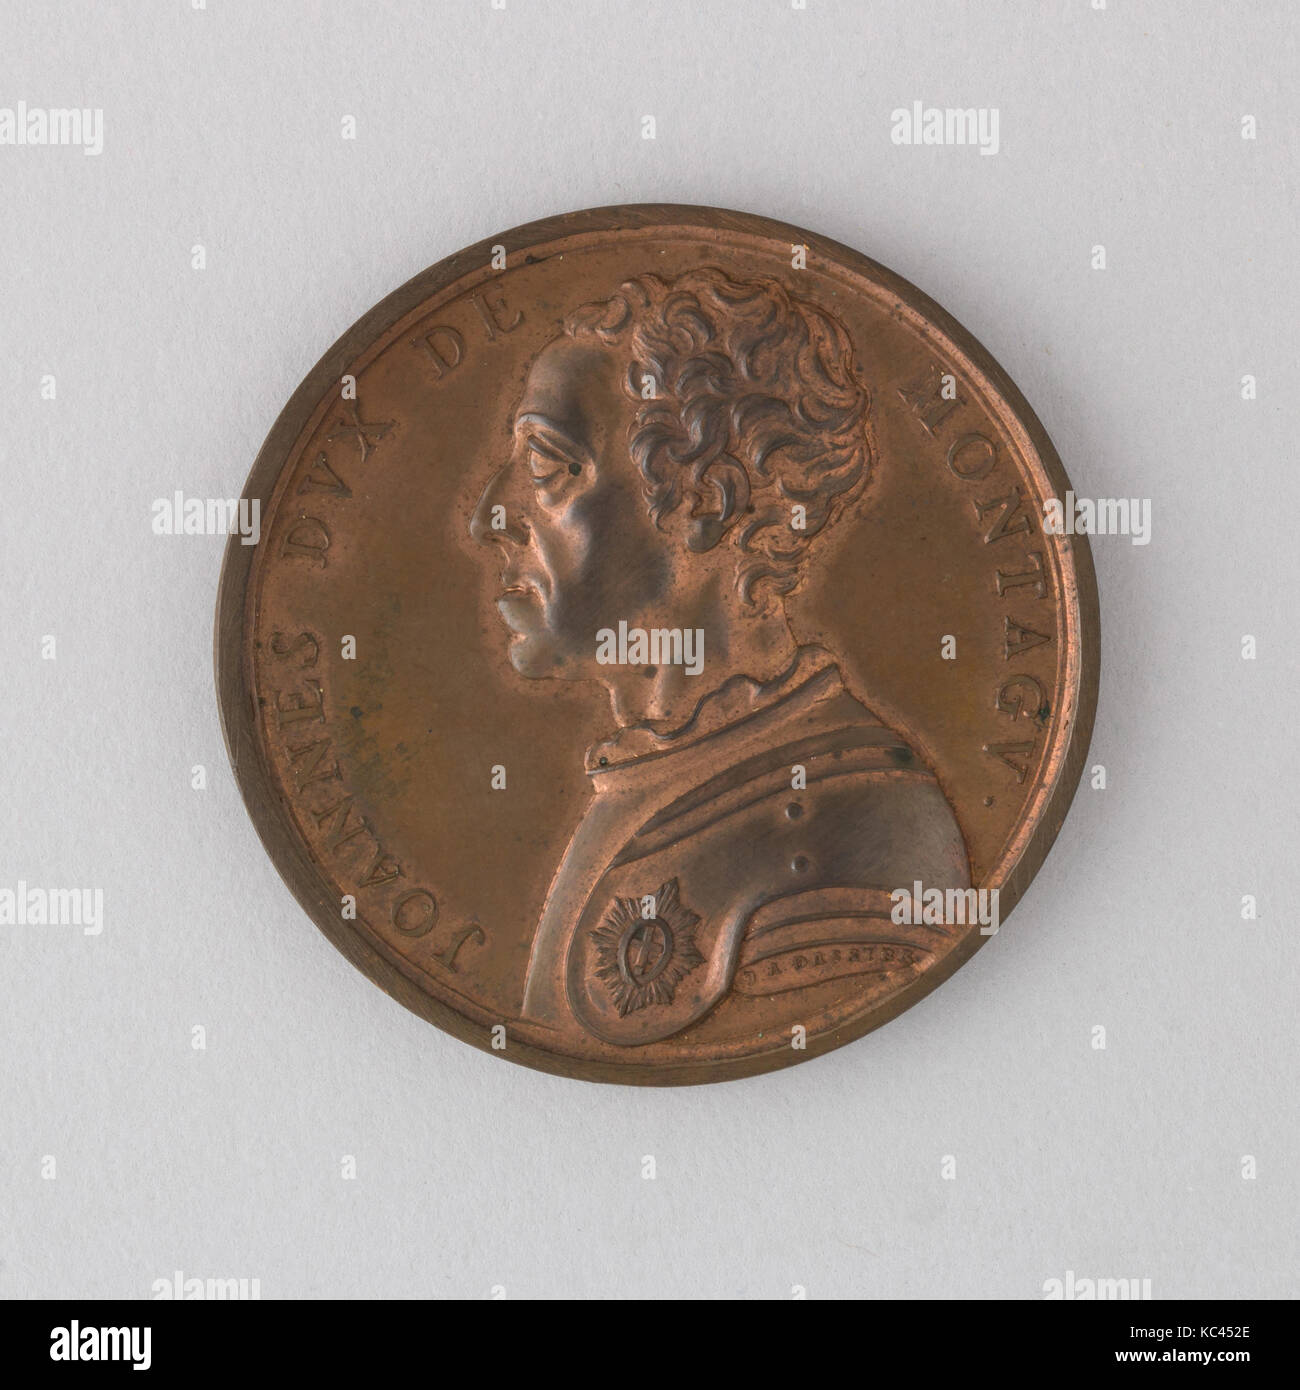 Medal Showing John, Second Duke of Montagu, 1751, Swiss, Bronze, Diam. 2 3/16 in. (5.6 cm); thickness 1/4 in. (0.6 cm); Wt. 2.6 Stock Photo